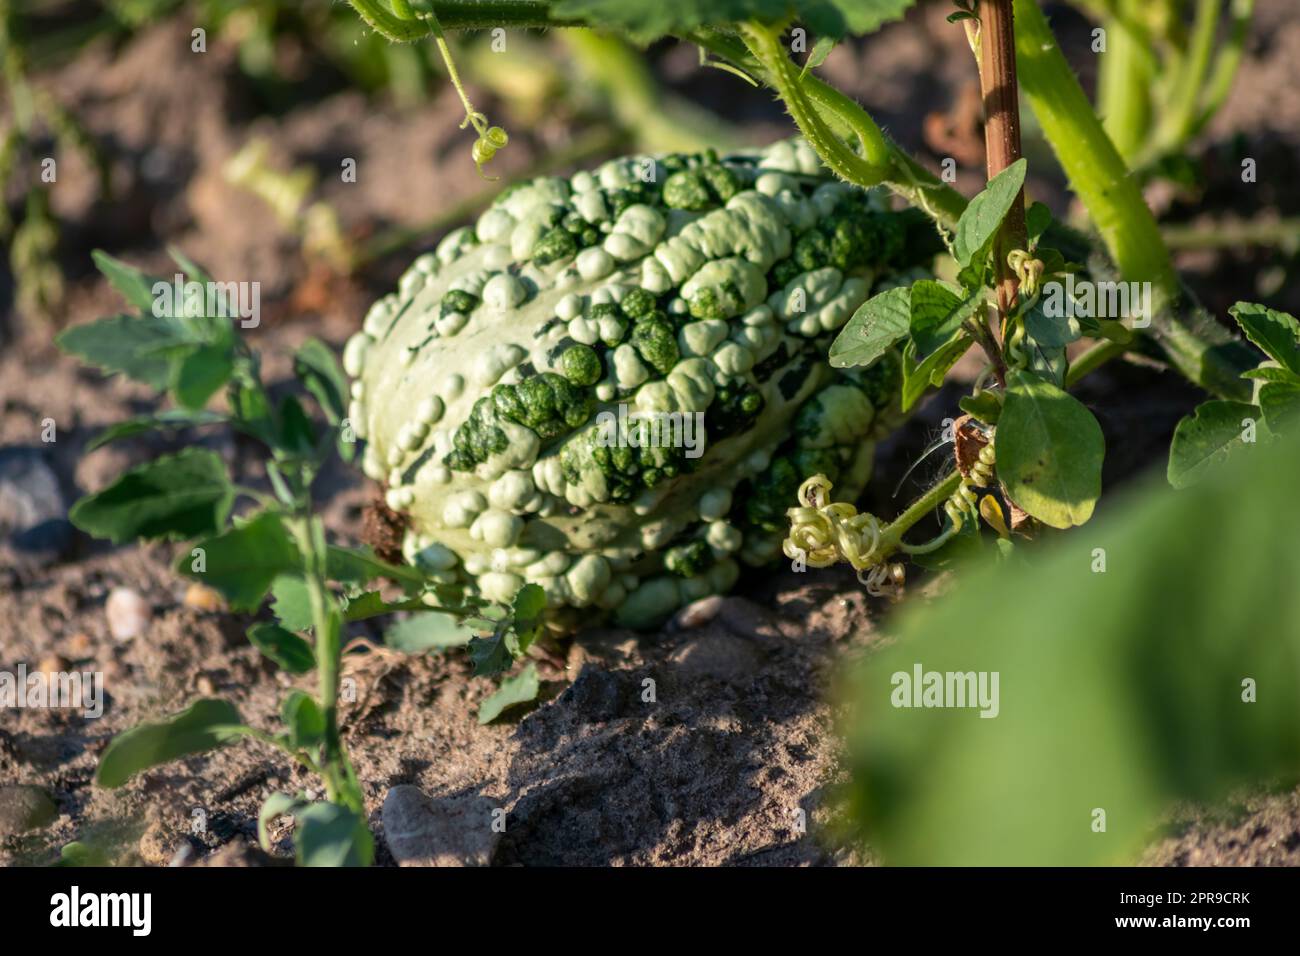 Growing pumpkins on organic farmland with ripening squash vegetables cultivation for halloween and thanksgiving with blossom home-grown cultivation of healthy nutrition as seasonal gardening snack Stock Photo